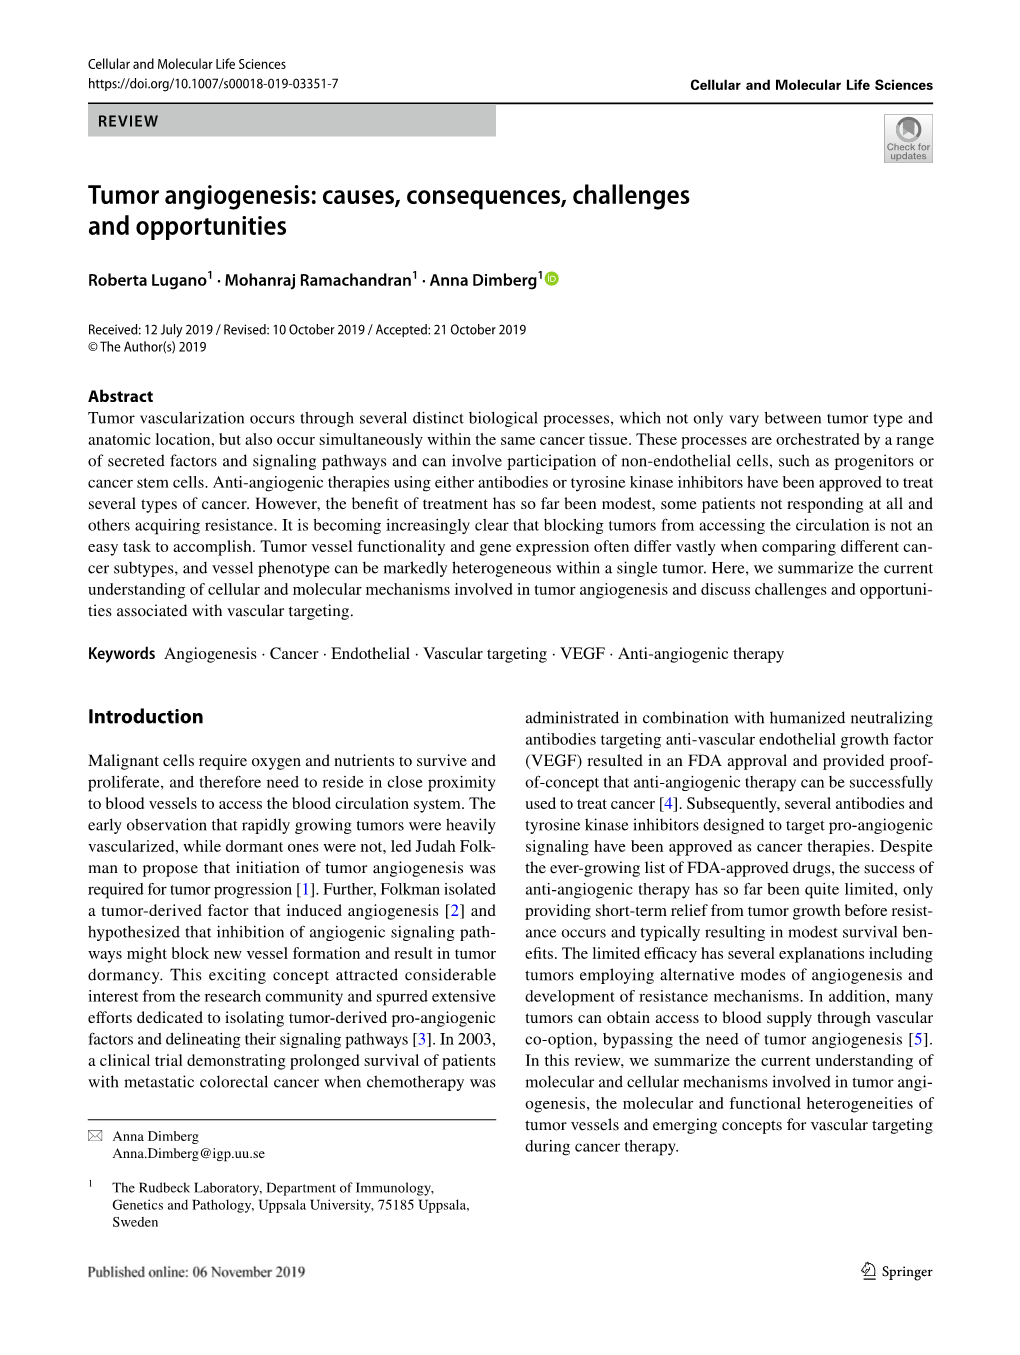 Tumor Angiogenesis: Causes, Consequences, Challenges and Opportunities